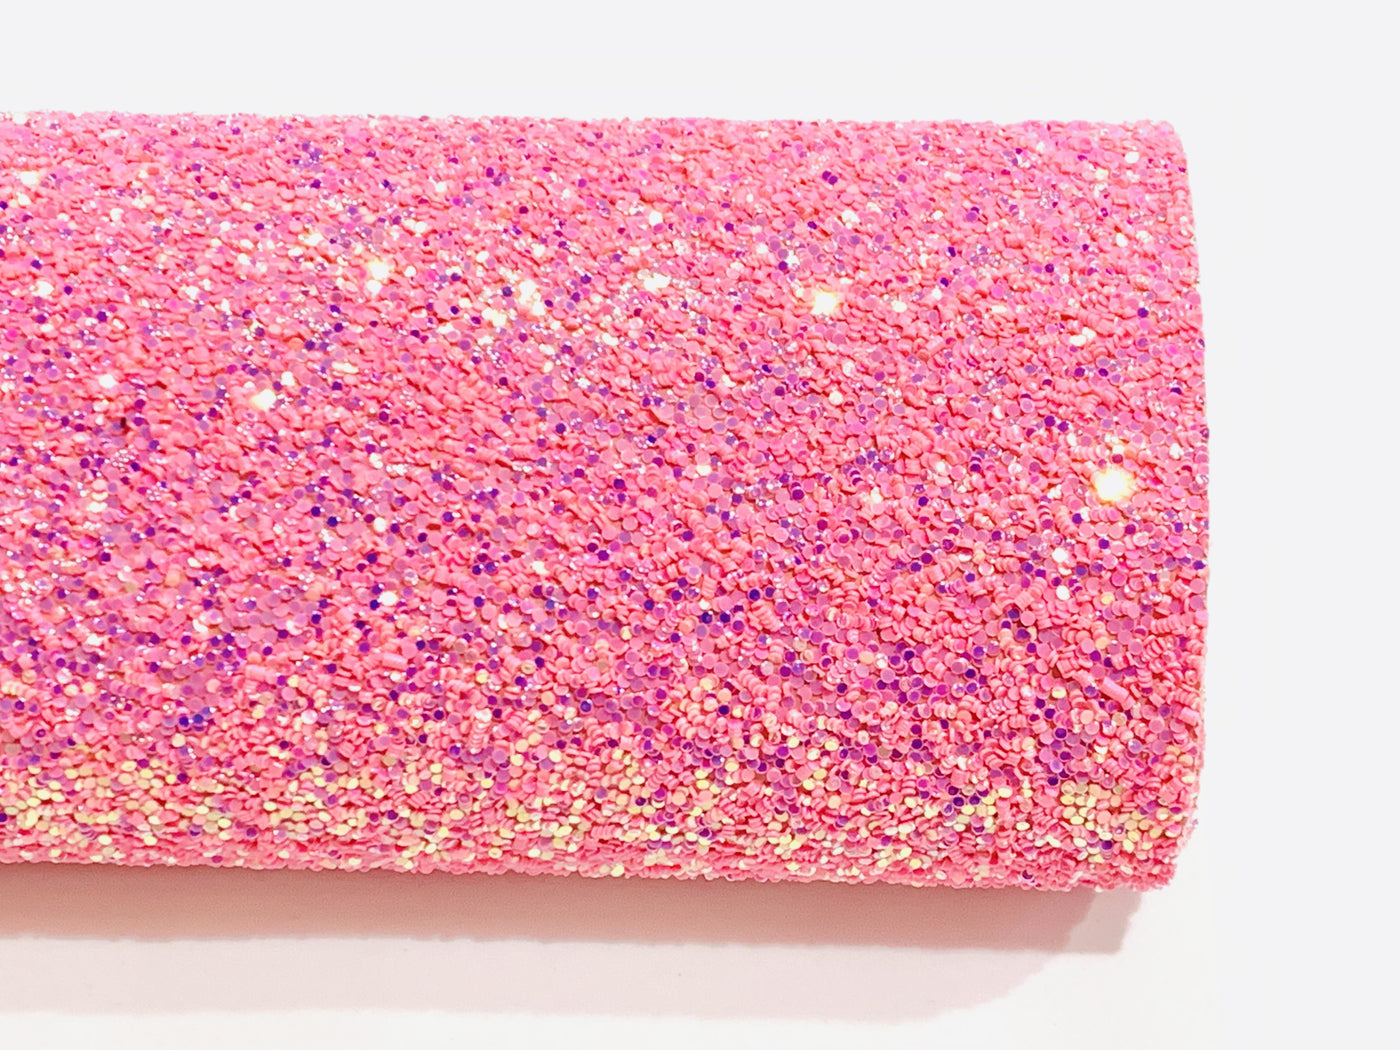 Bright Coral Iridescent Chunky Glitter Fabric Sheets